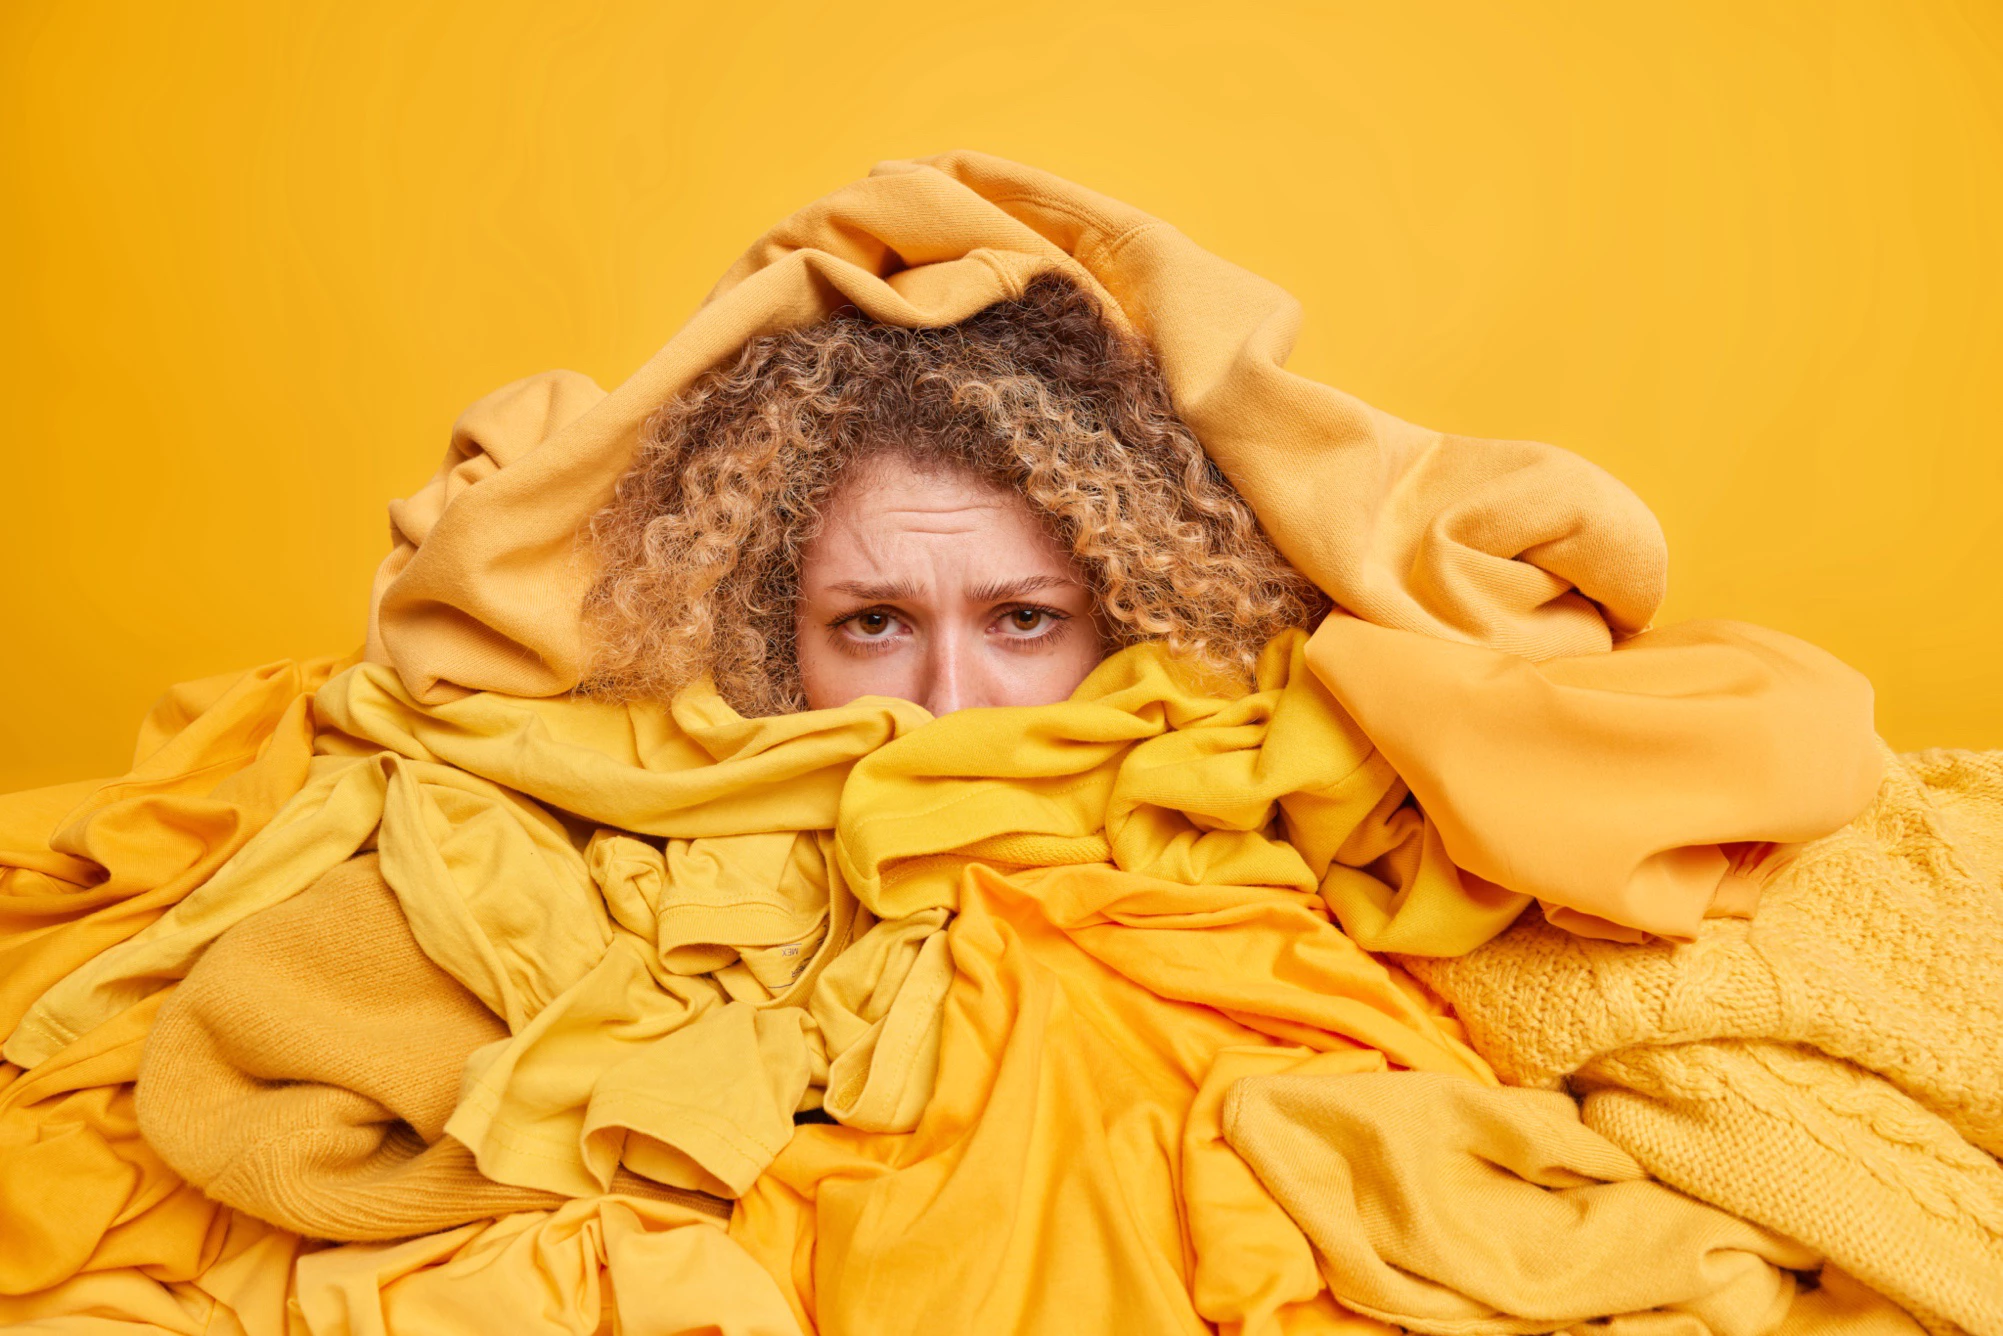 Image of woman organizing clothing - surrounded by a pile of yellow clothing